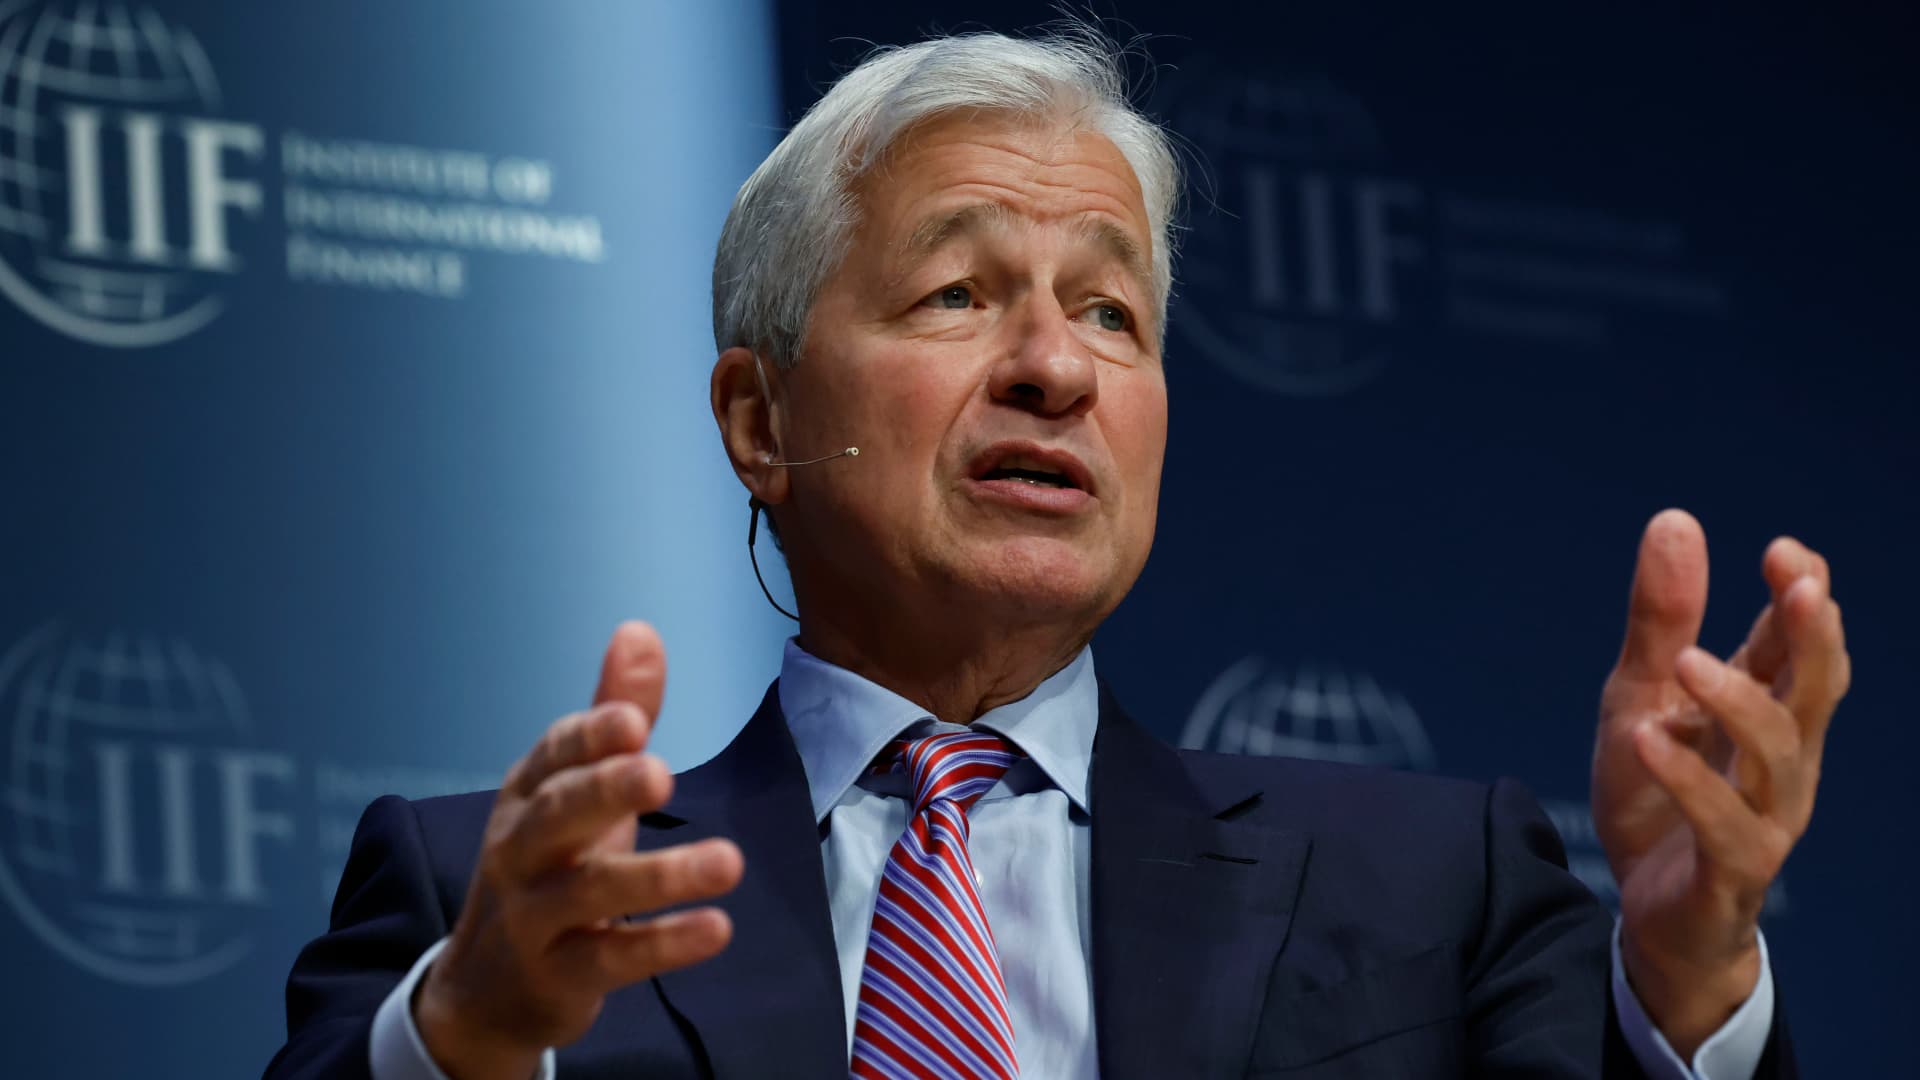 Jamie Dimon, chairman and chief executive officer of JPMorgan Chase & Co., speaks during the Institute of International Finance (IIF) annual membership meeting in Washington, DC, US, on Thursday, Oct. 13, 2022. 